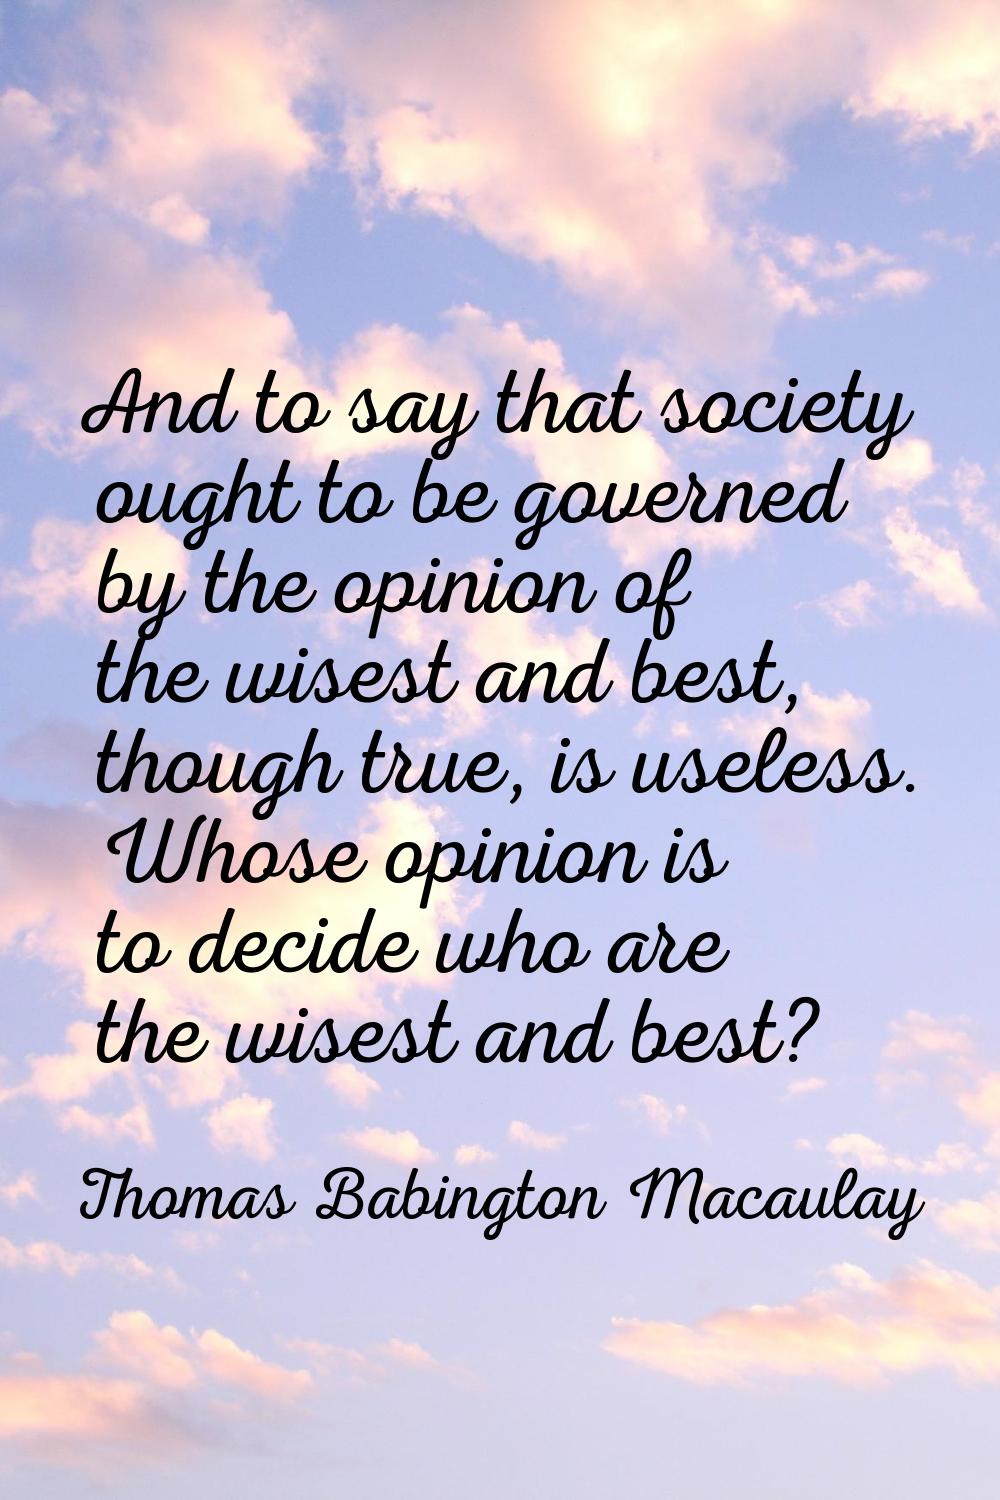 And to say that society ought to be governed by the opinion of the wisest and best, though true, is